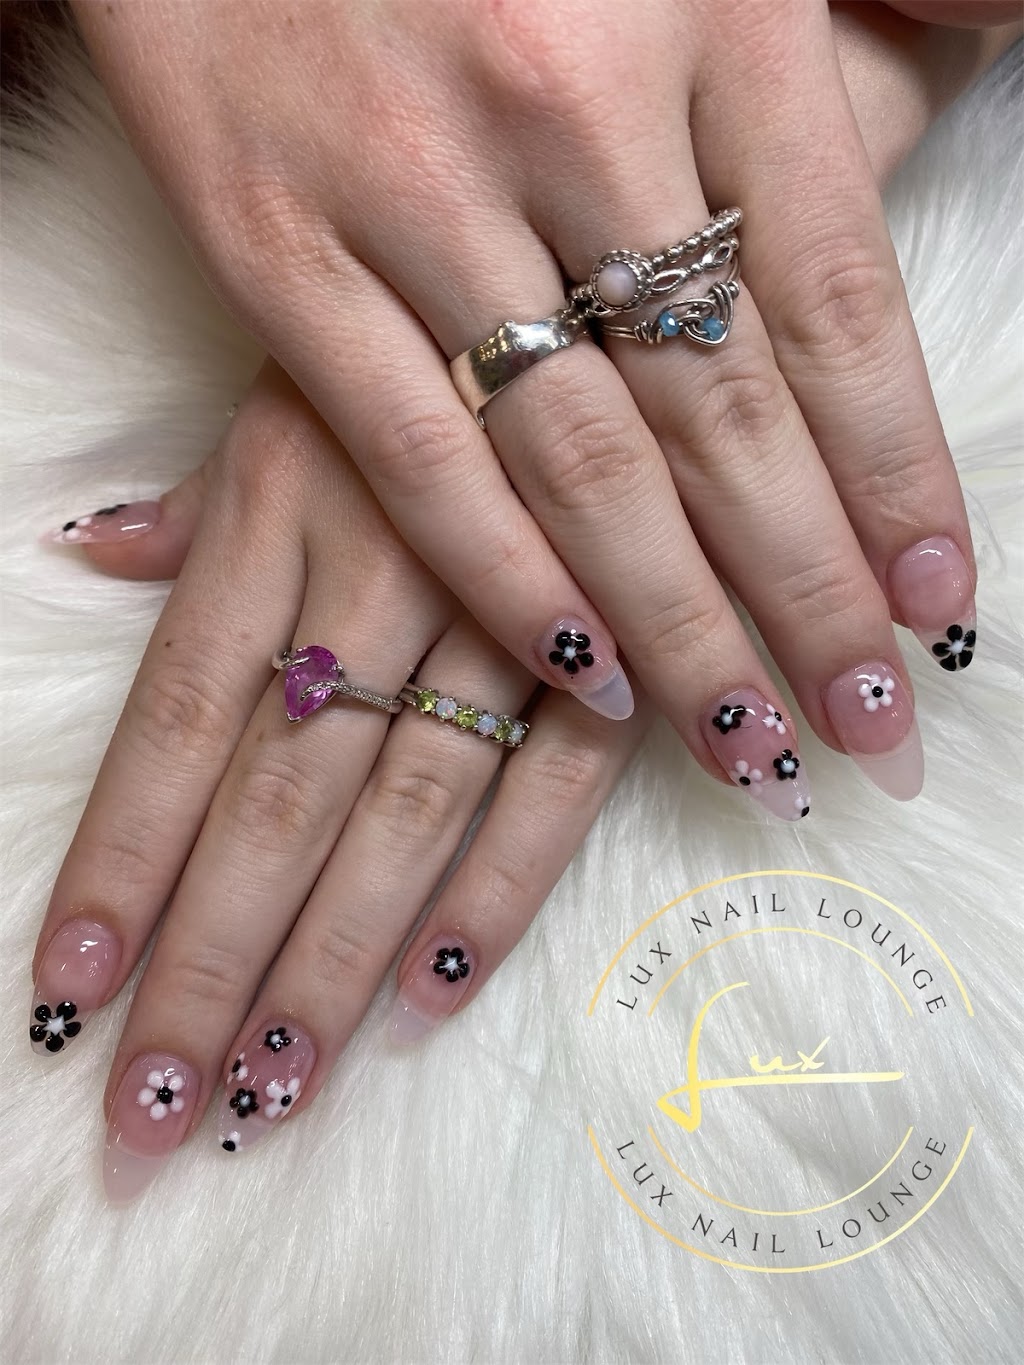 Lux Nail Lounge | 1949 County Rd 419 Ste 1231, Oviedo, FL 32766 | Phone: (321) 765-4778